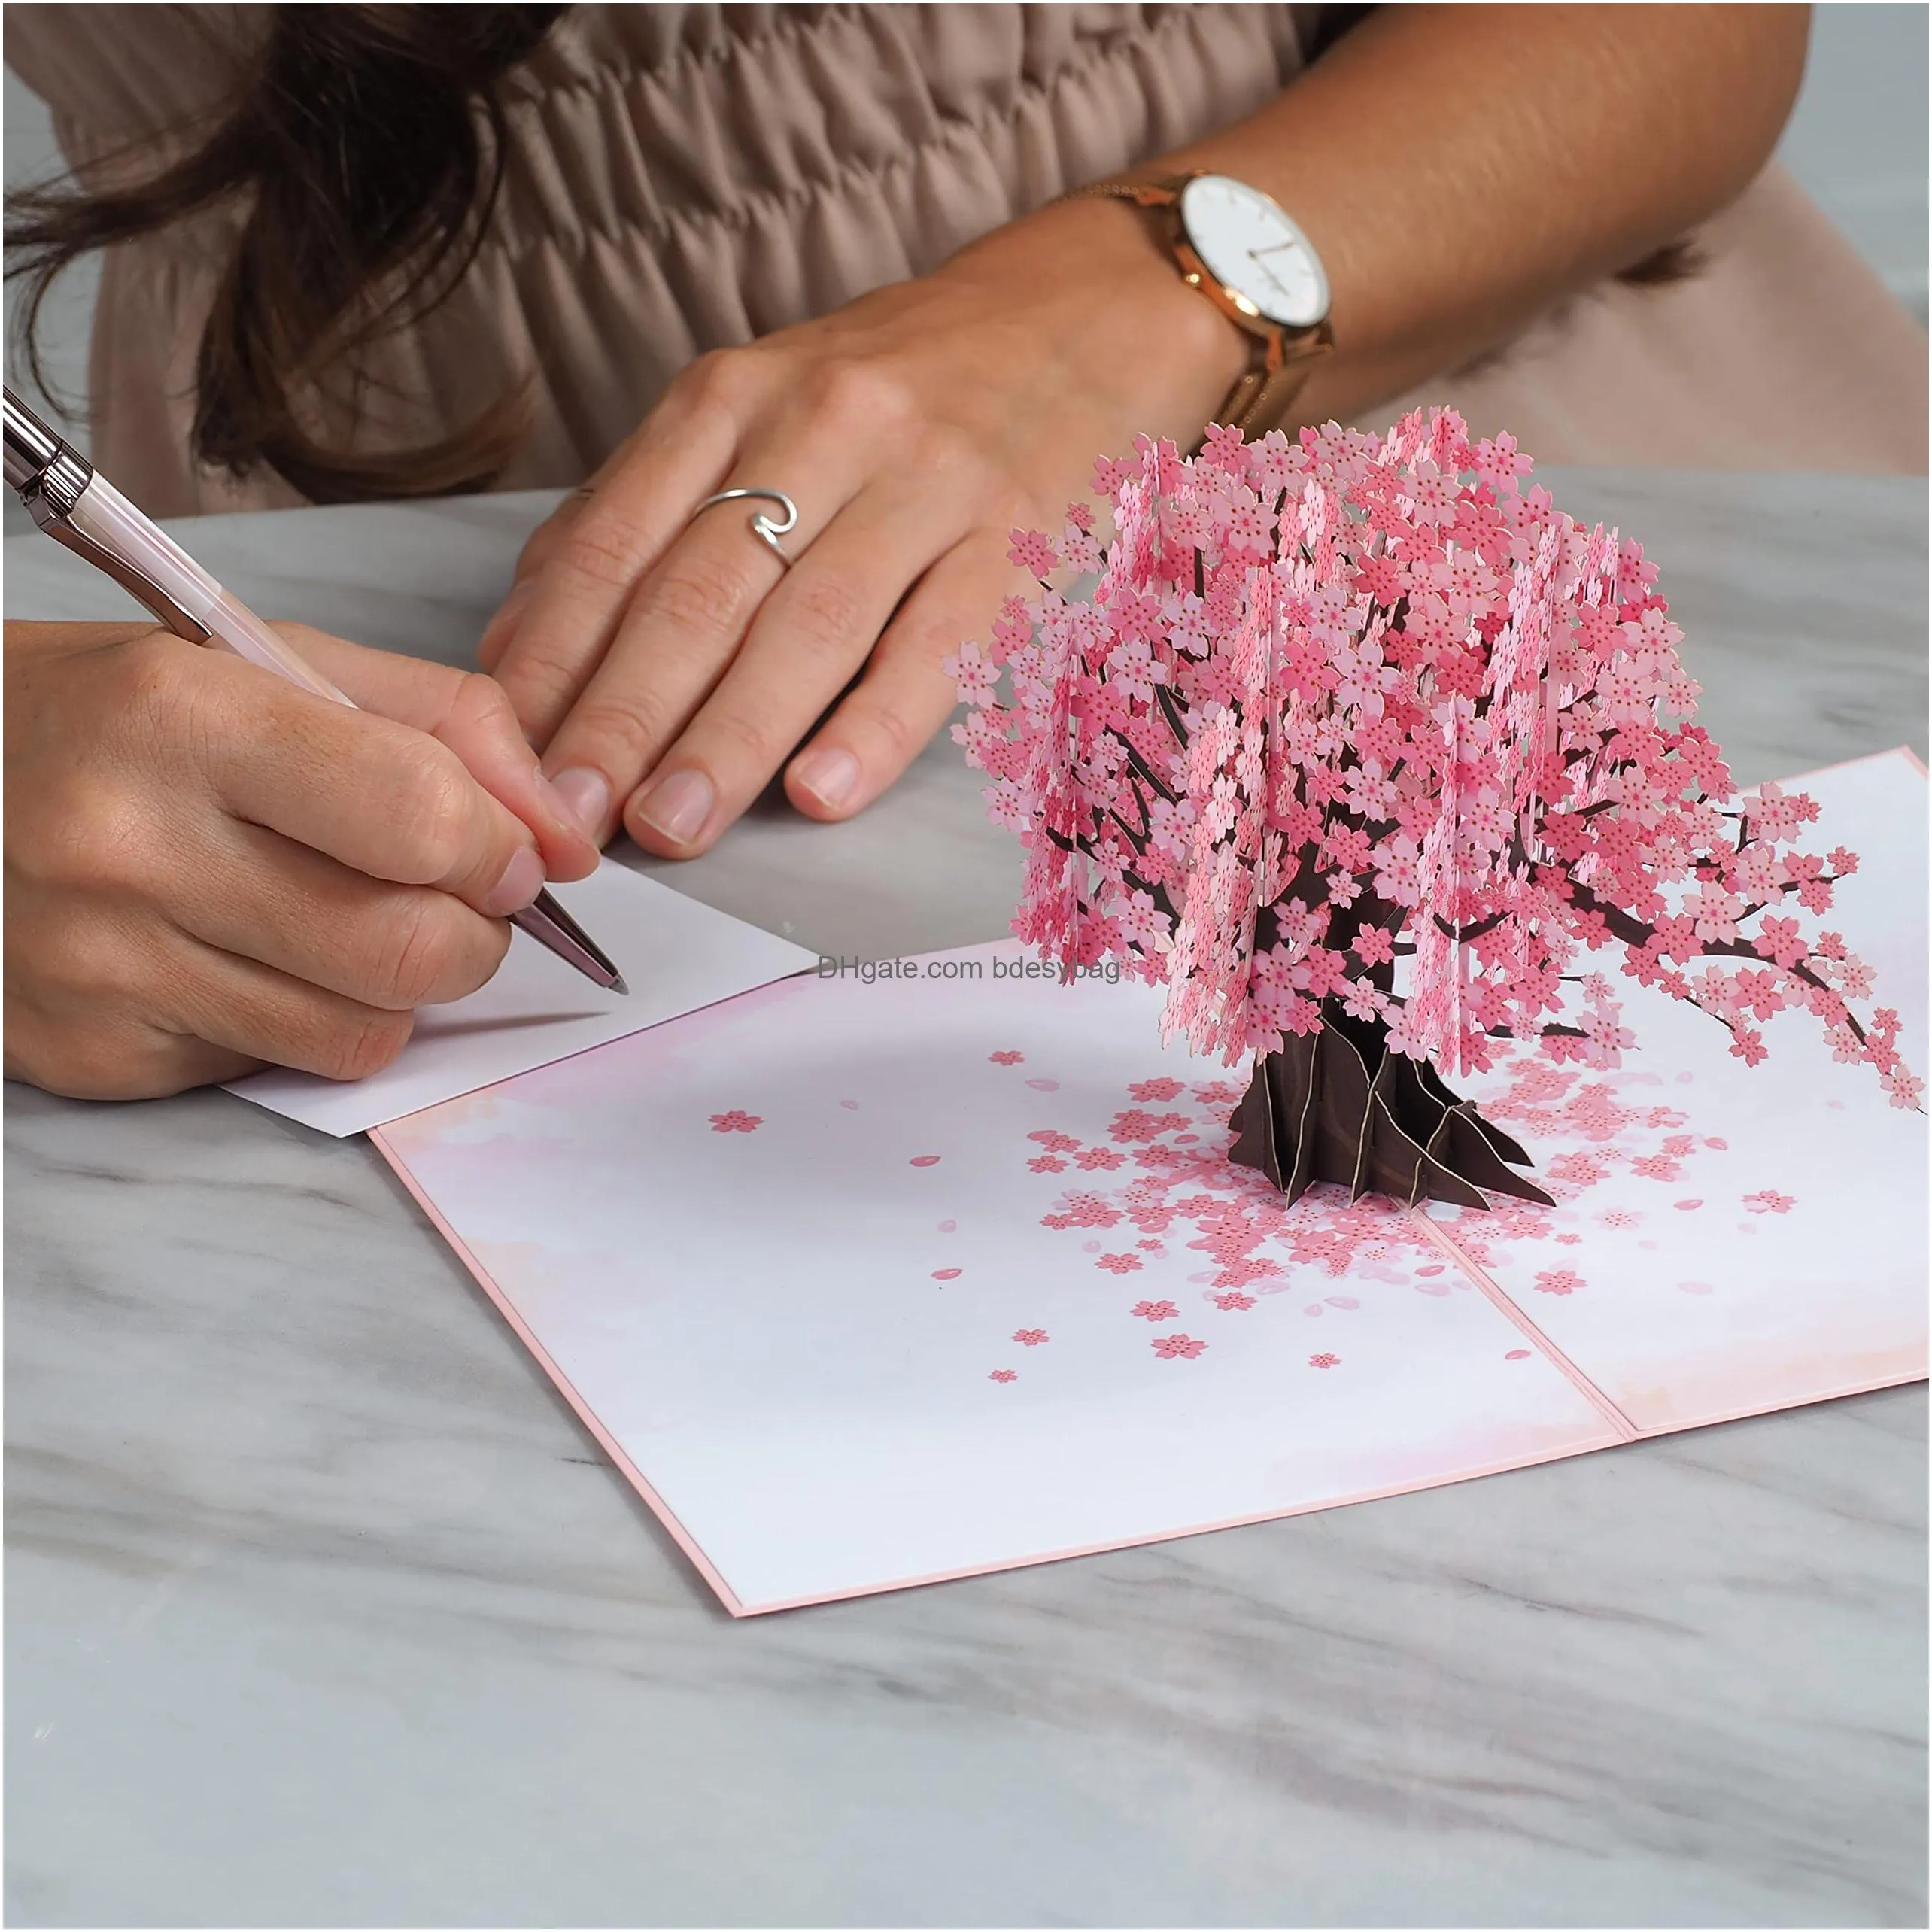 3d cherry blossom  up card for valentines spring mothers day all occasions 5 x 7 cover includes envelope and note tag